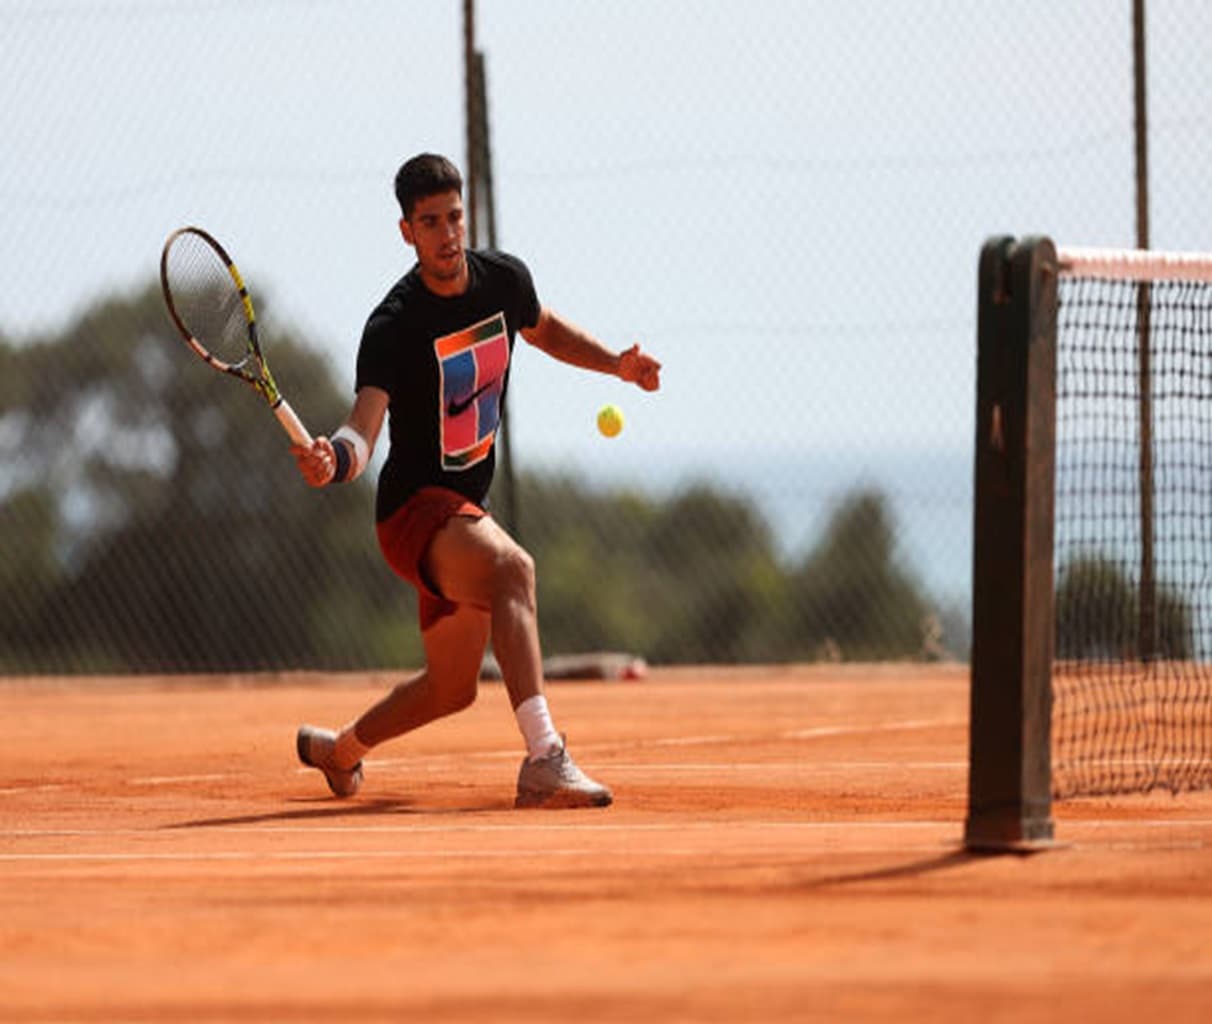 The two-time champion gives up his crown: Carlos Alcaraz falls against Andrey Rublev and is eliminated from the Madrid Masters 1000